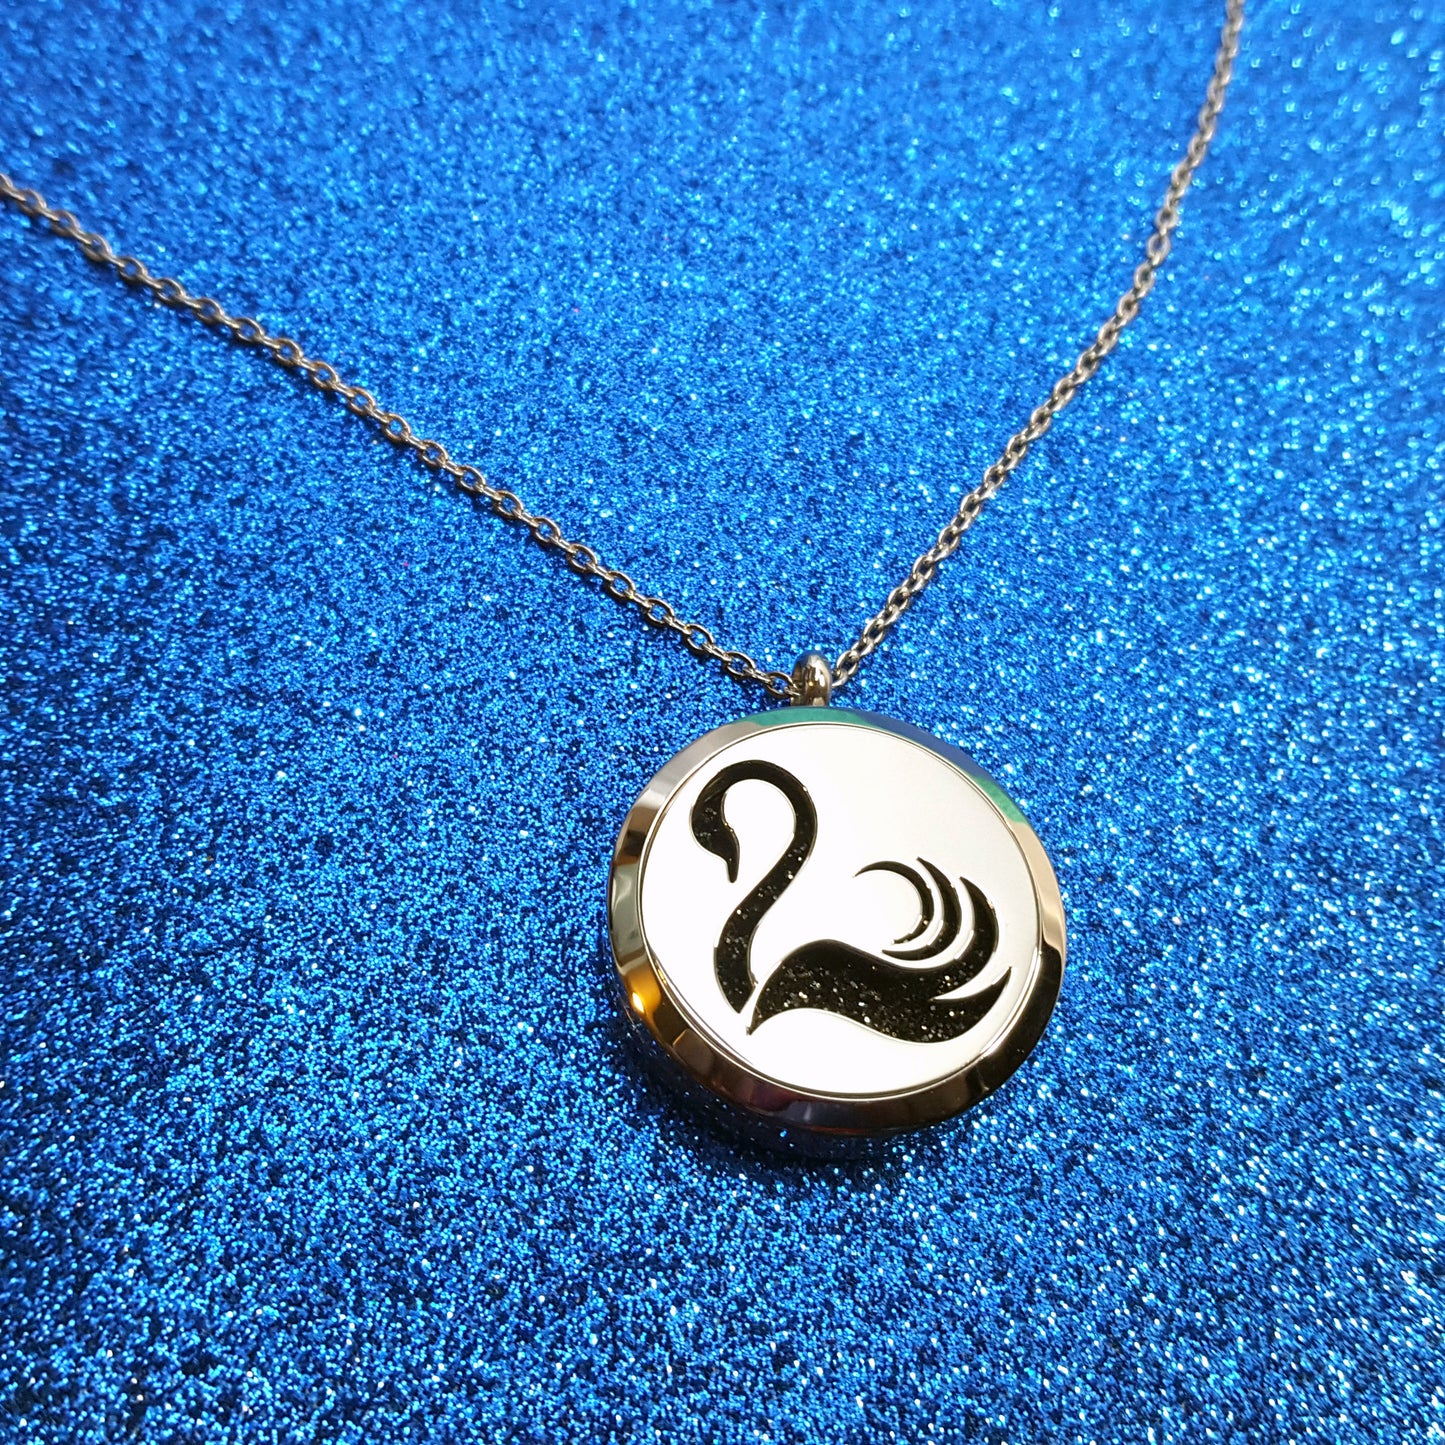 Black Swan inspired bookish oil diffuser necklace